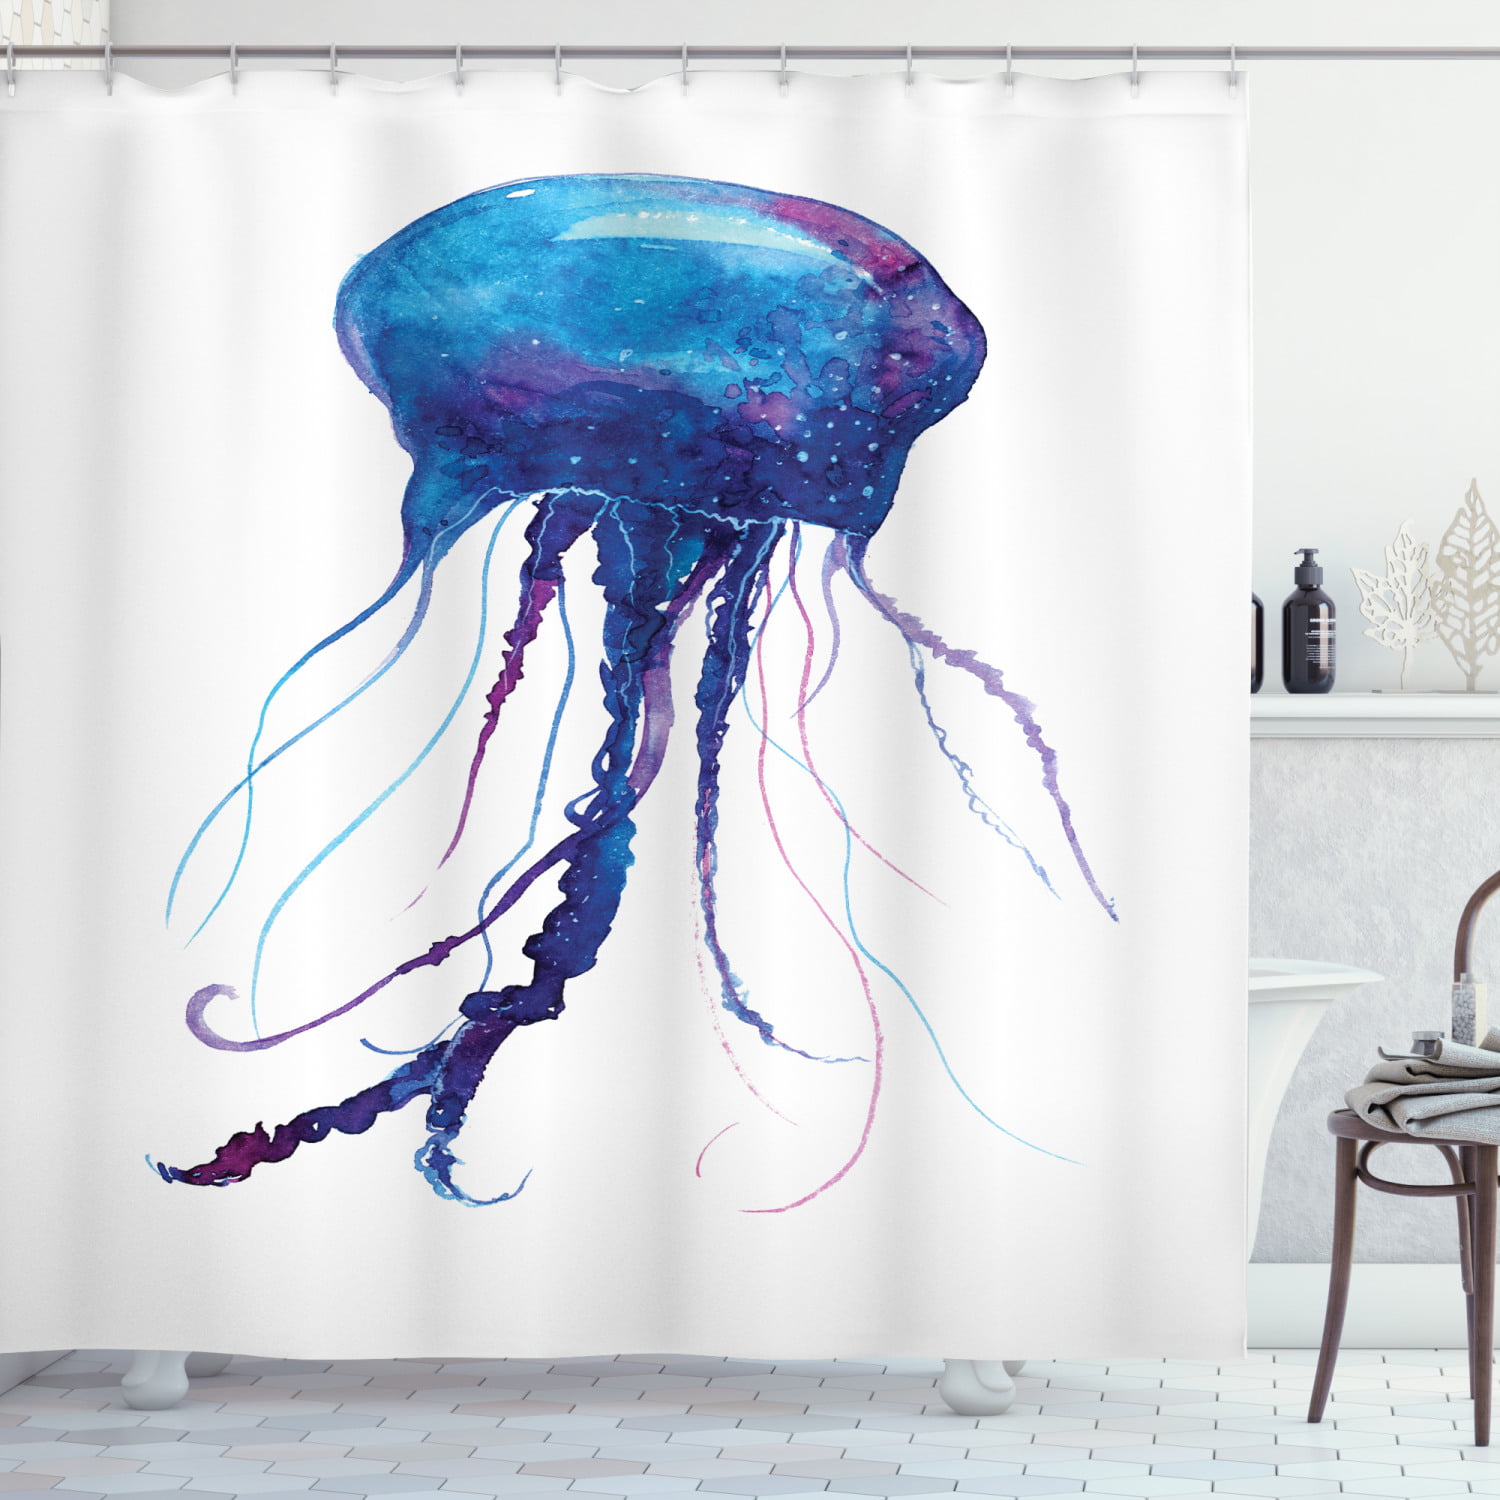 Details about   Jellyfish Shower Curtain Aqua Colors Creative Print for Bathroom 